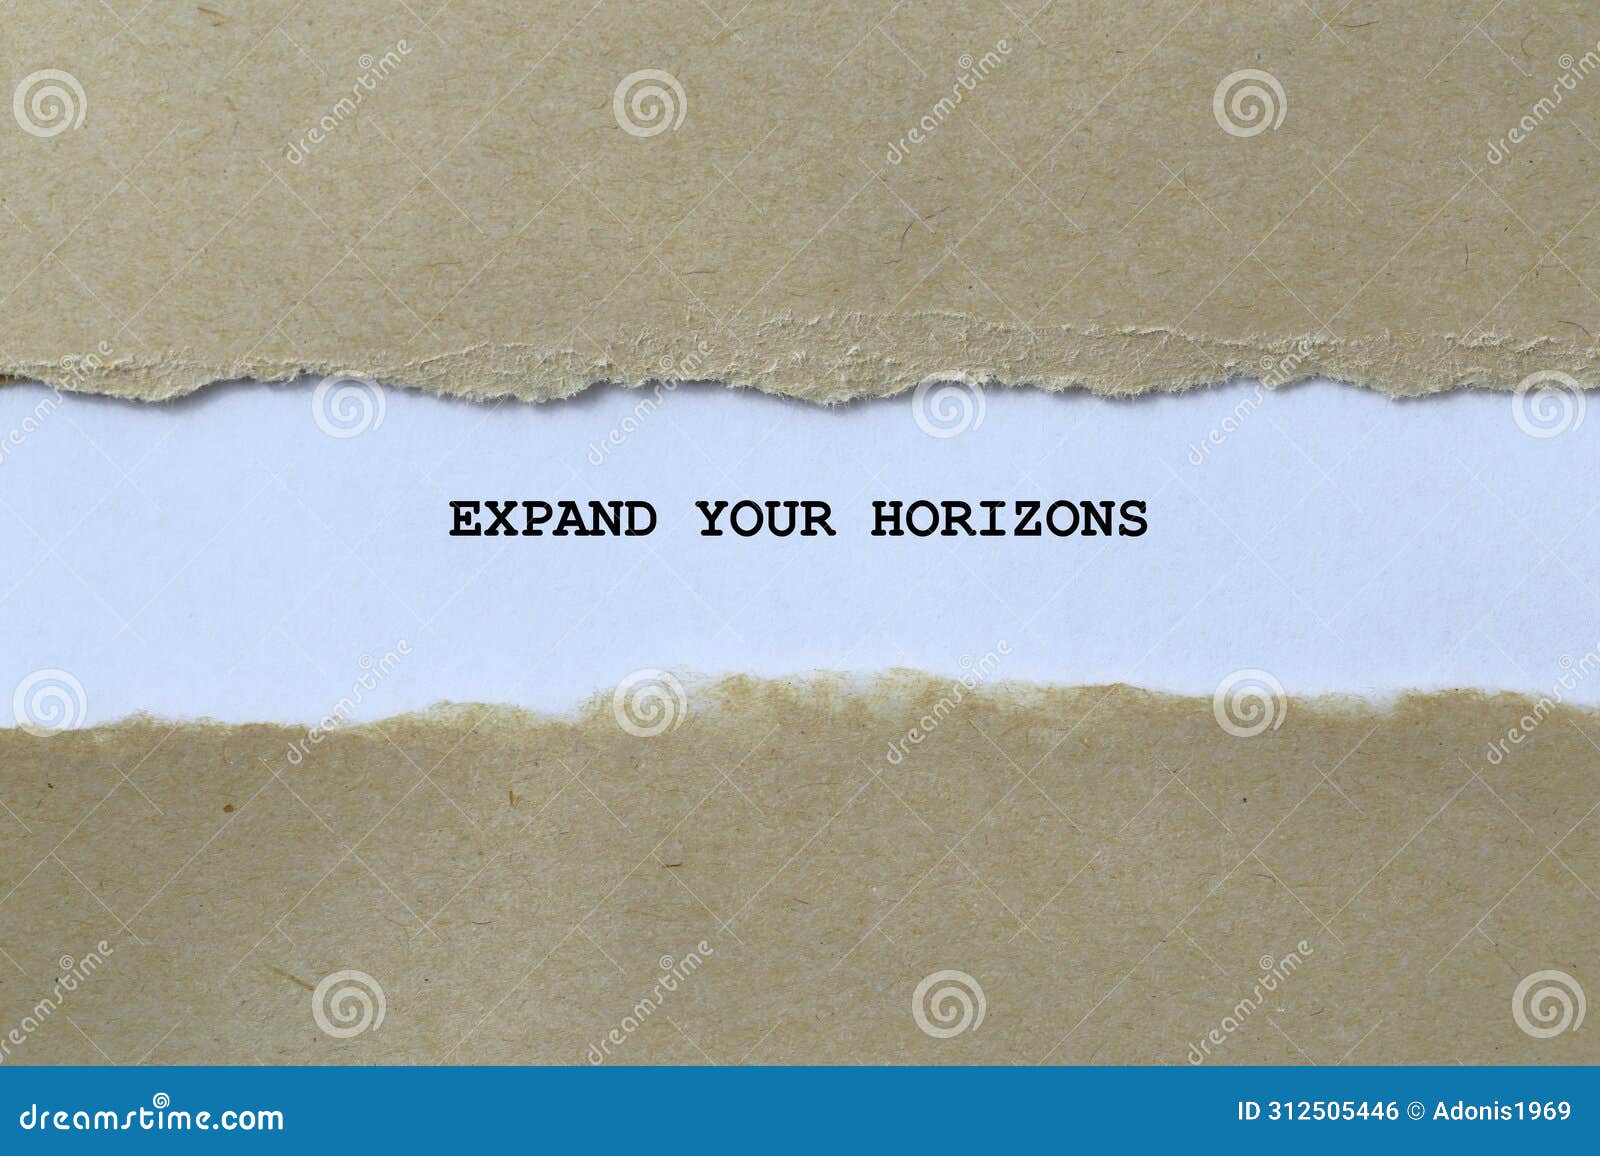 expand your horizons on white paper